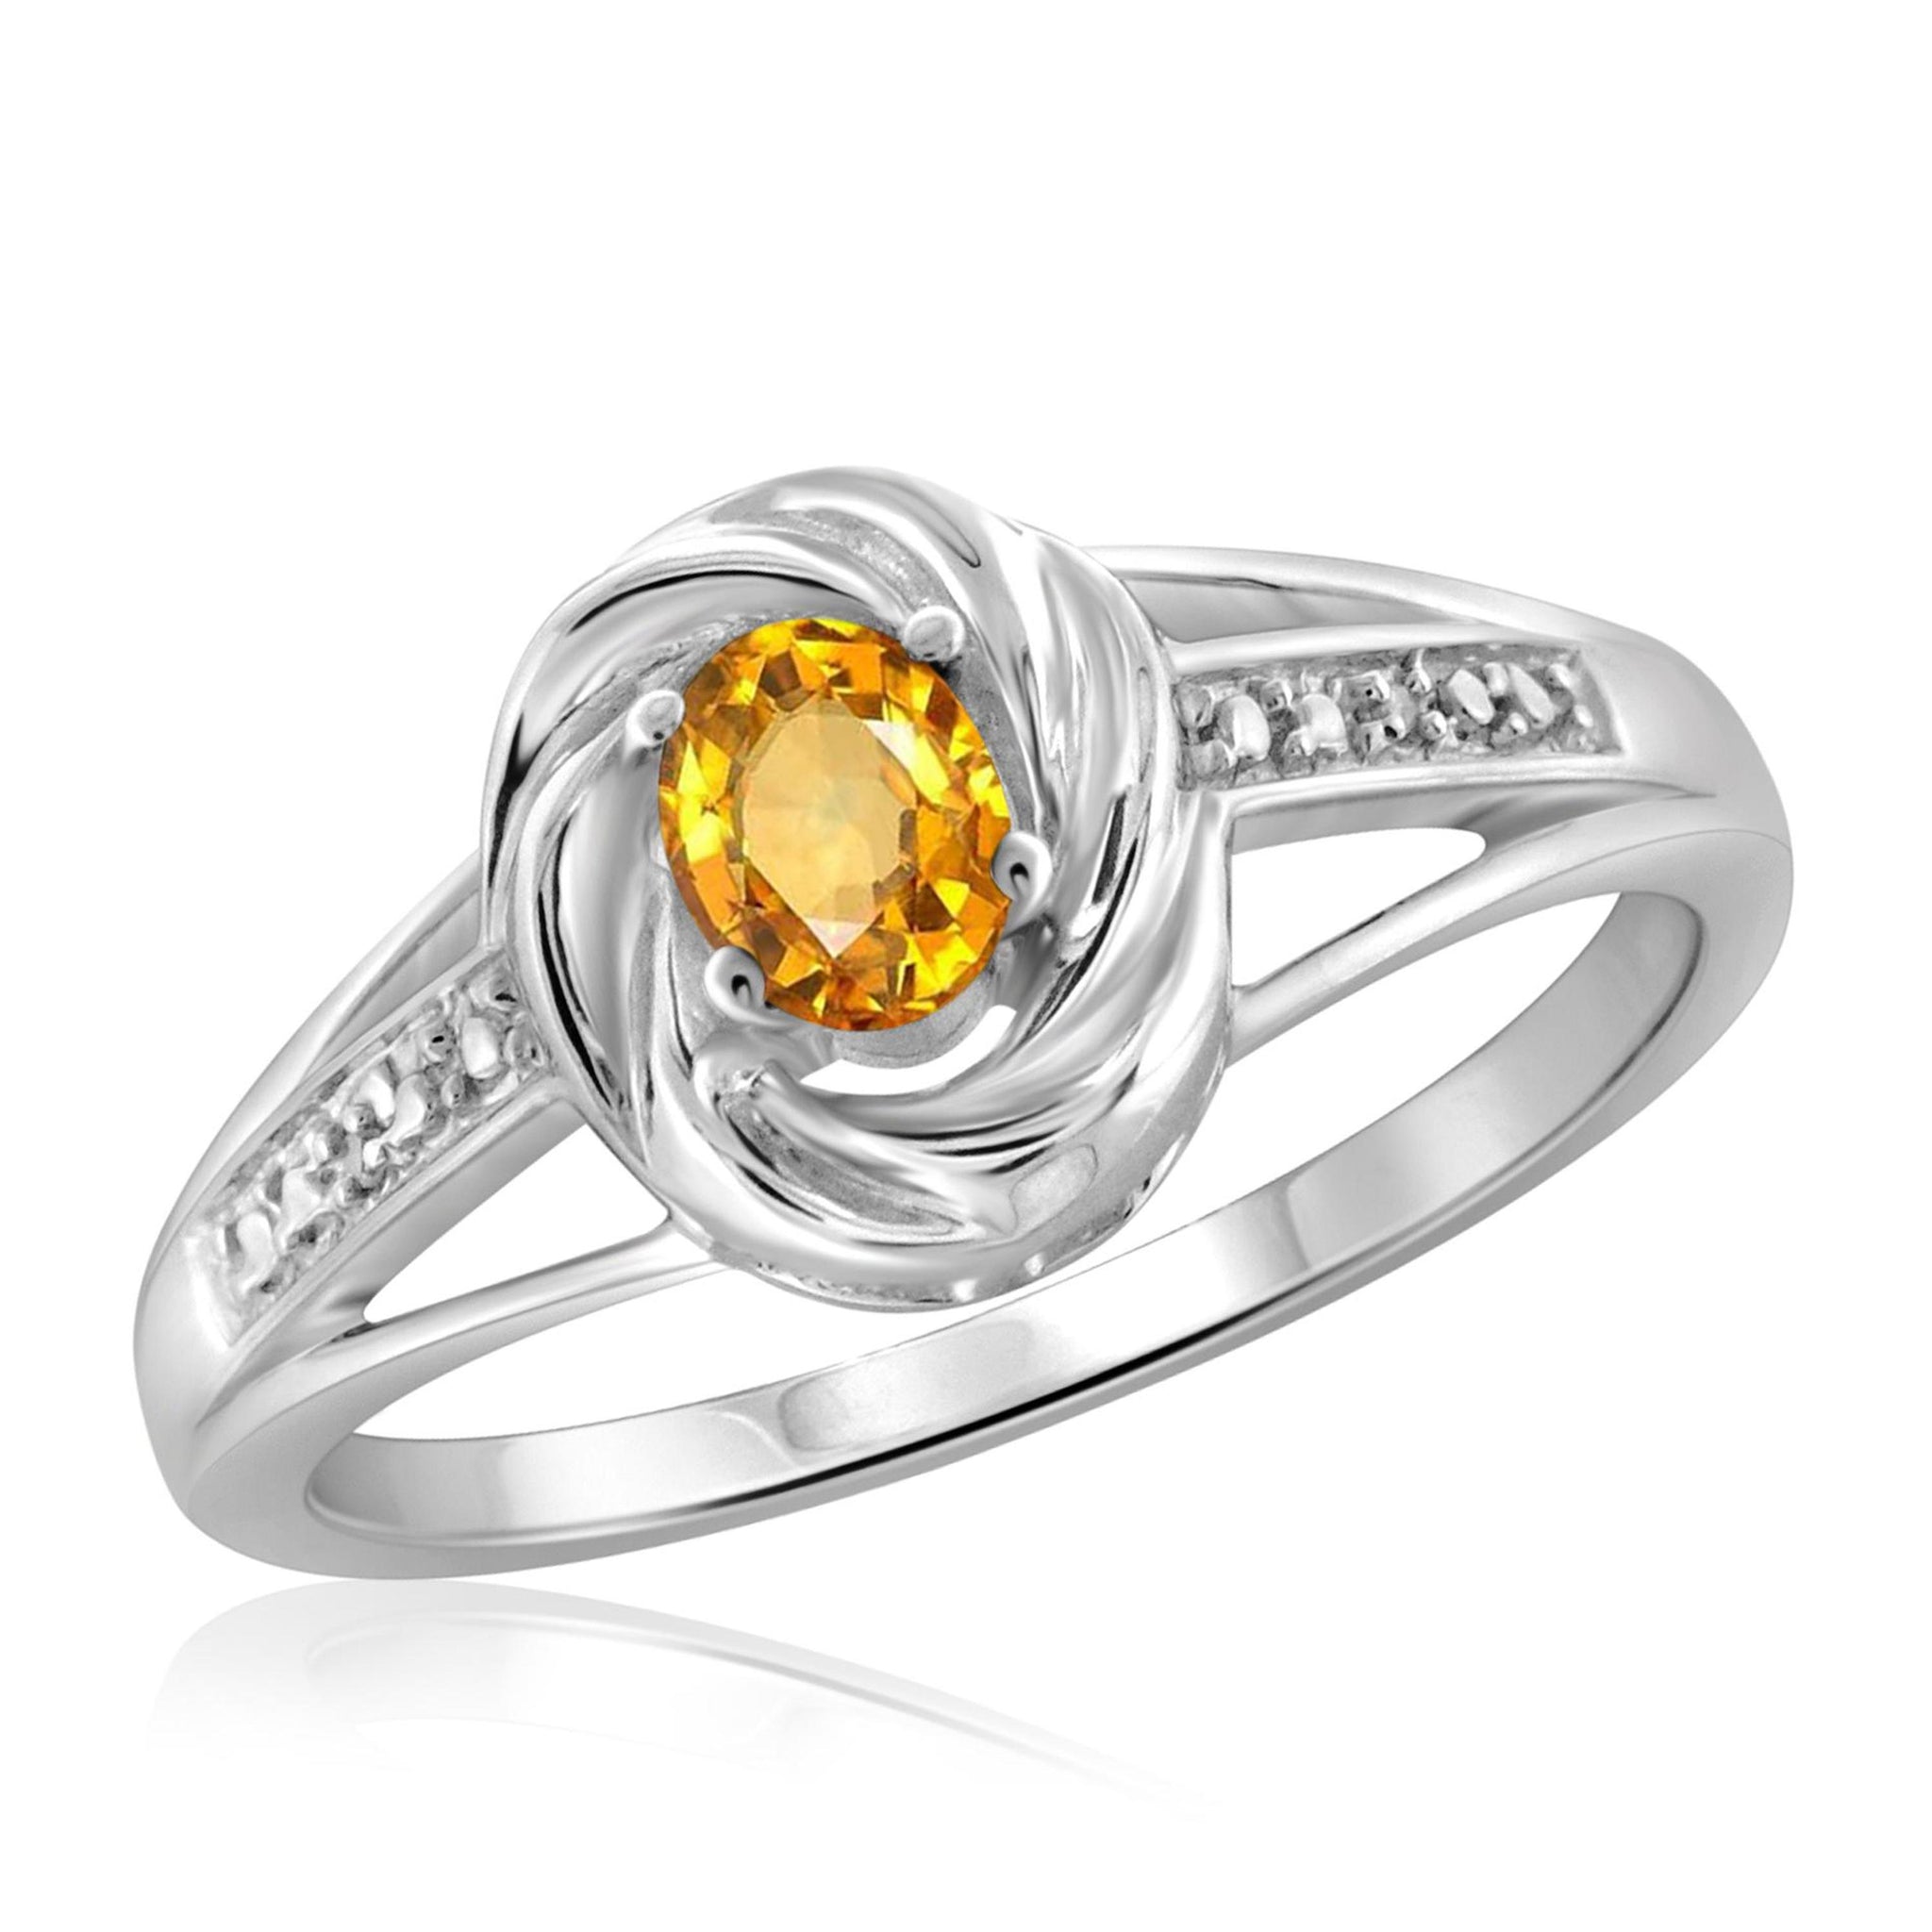 JewelonFire 1/4 Carat T.G.W. Citrine And White Diamond Accent Sterling Silver Ring - Assorted Colors